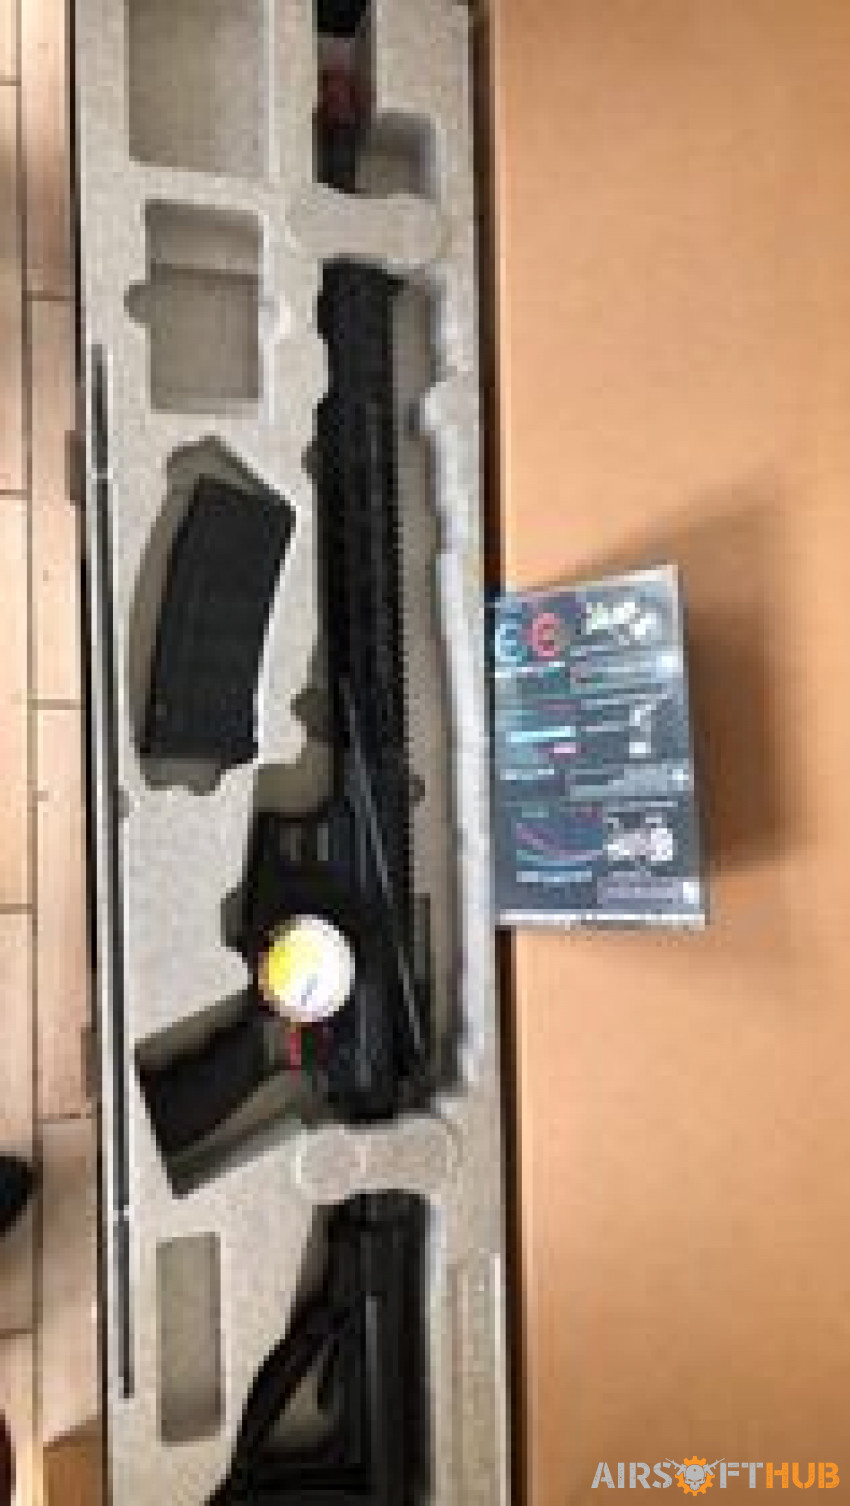 G&G tr16 mbr 556wh - Used airsoft equipment